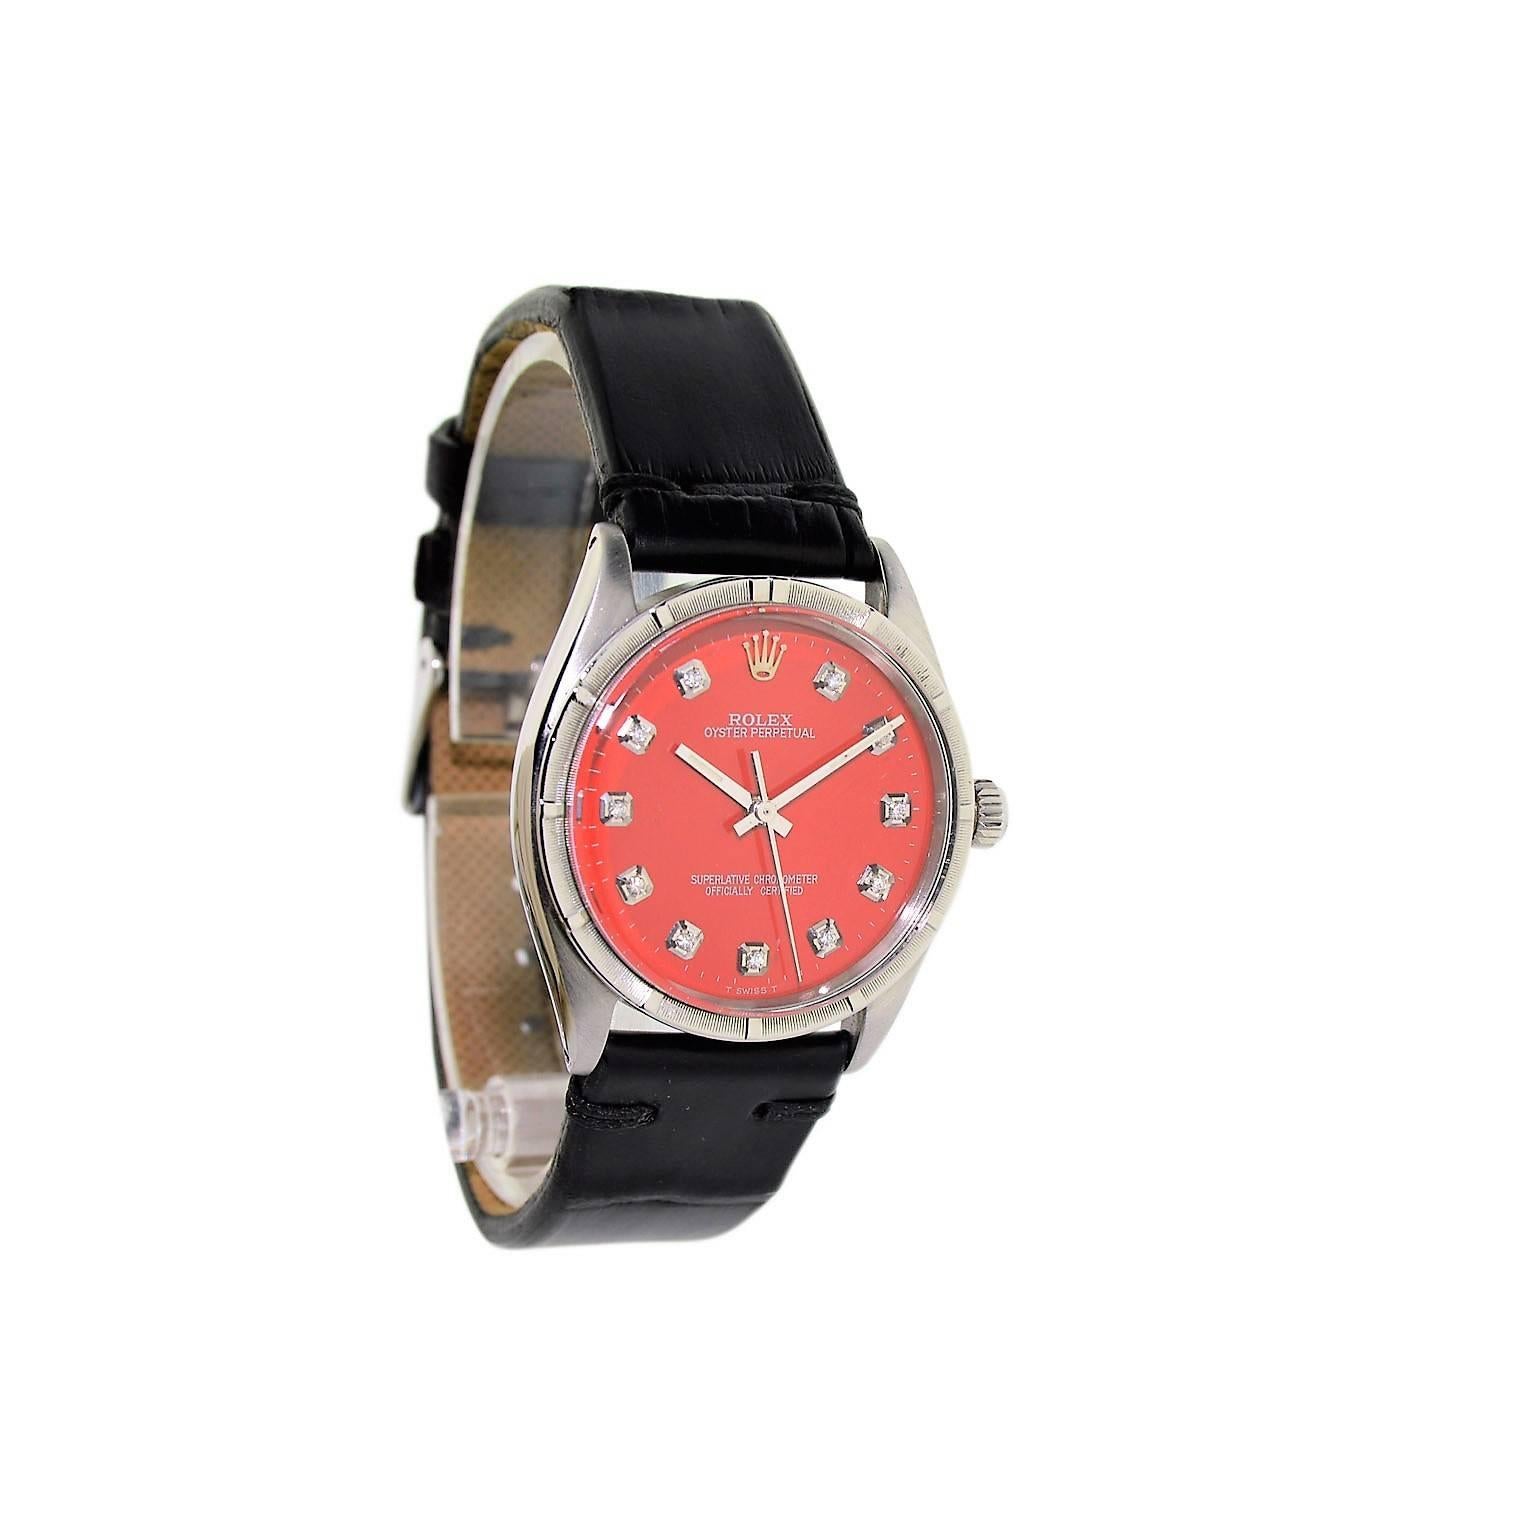 FACTORY / HOUSE: Rolex Watch Company
STYLE / REFERENCE: Machined Bezel / Ref. 1007
METAL / MATERIAL: Stainless Steel
DIMENSIONS: 39mm X 34mm
CIRCA: 1962 / 1963
MOVEMENT / CALIBER: Manual Winding / 26 Jewels / Cal. 1560
DIAL / HANDS: Red Replacement